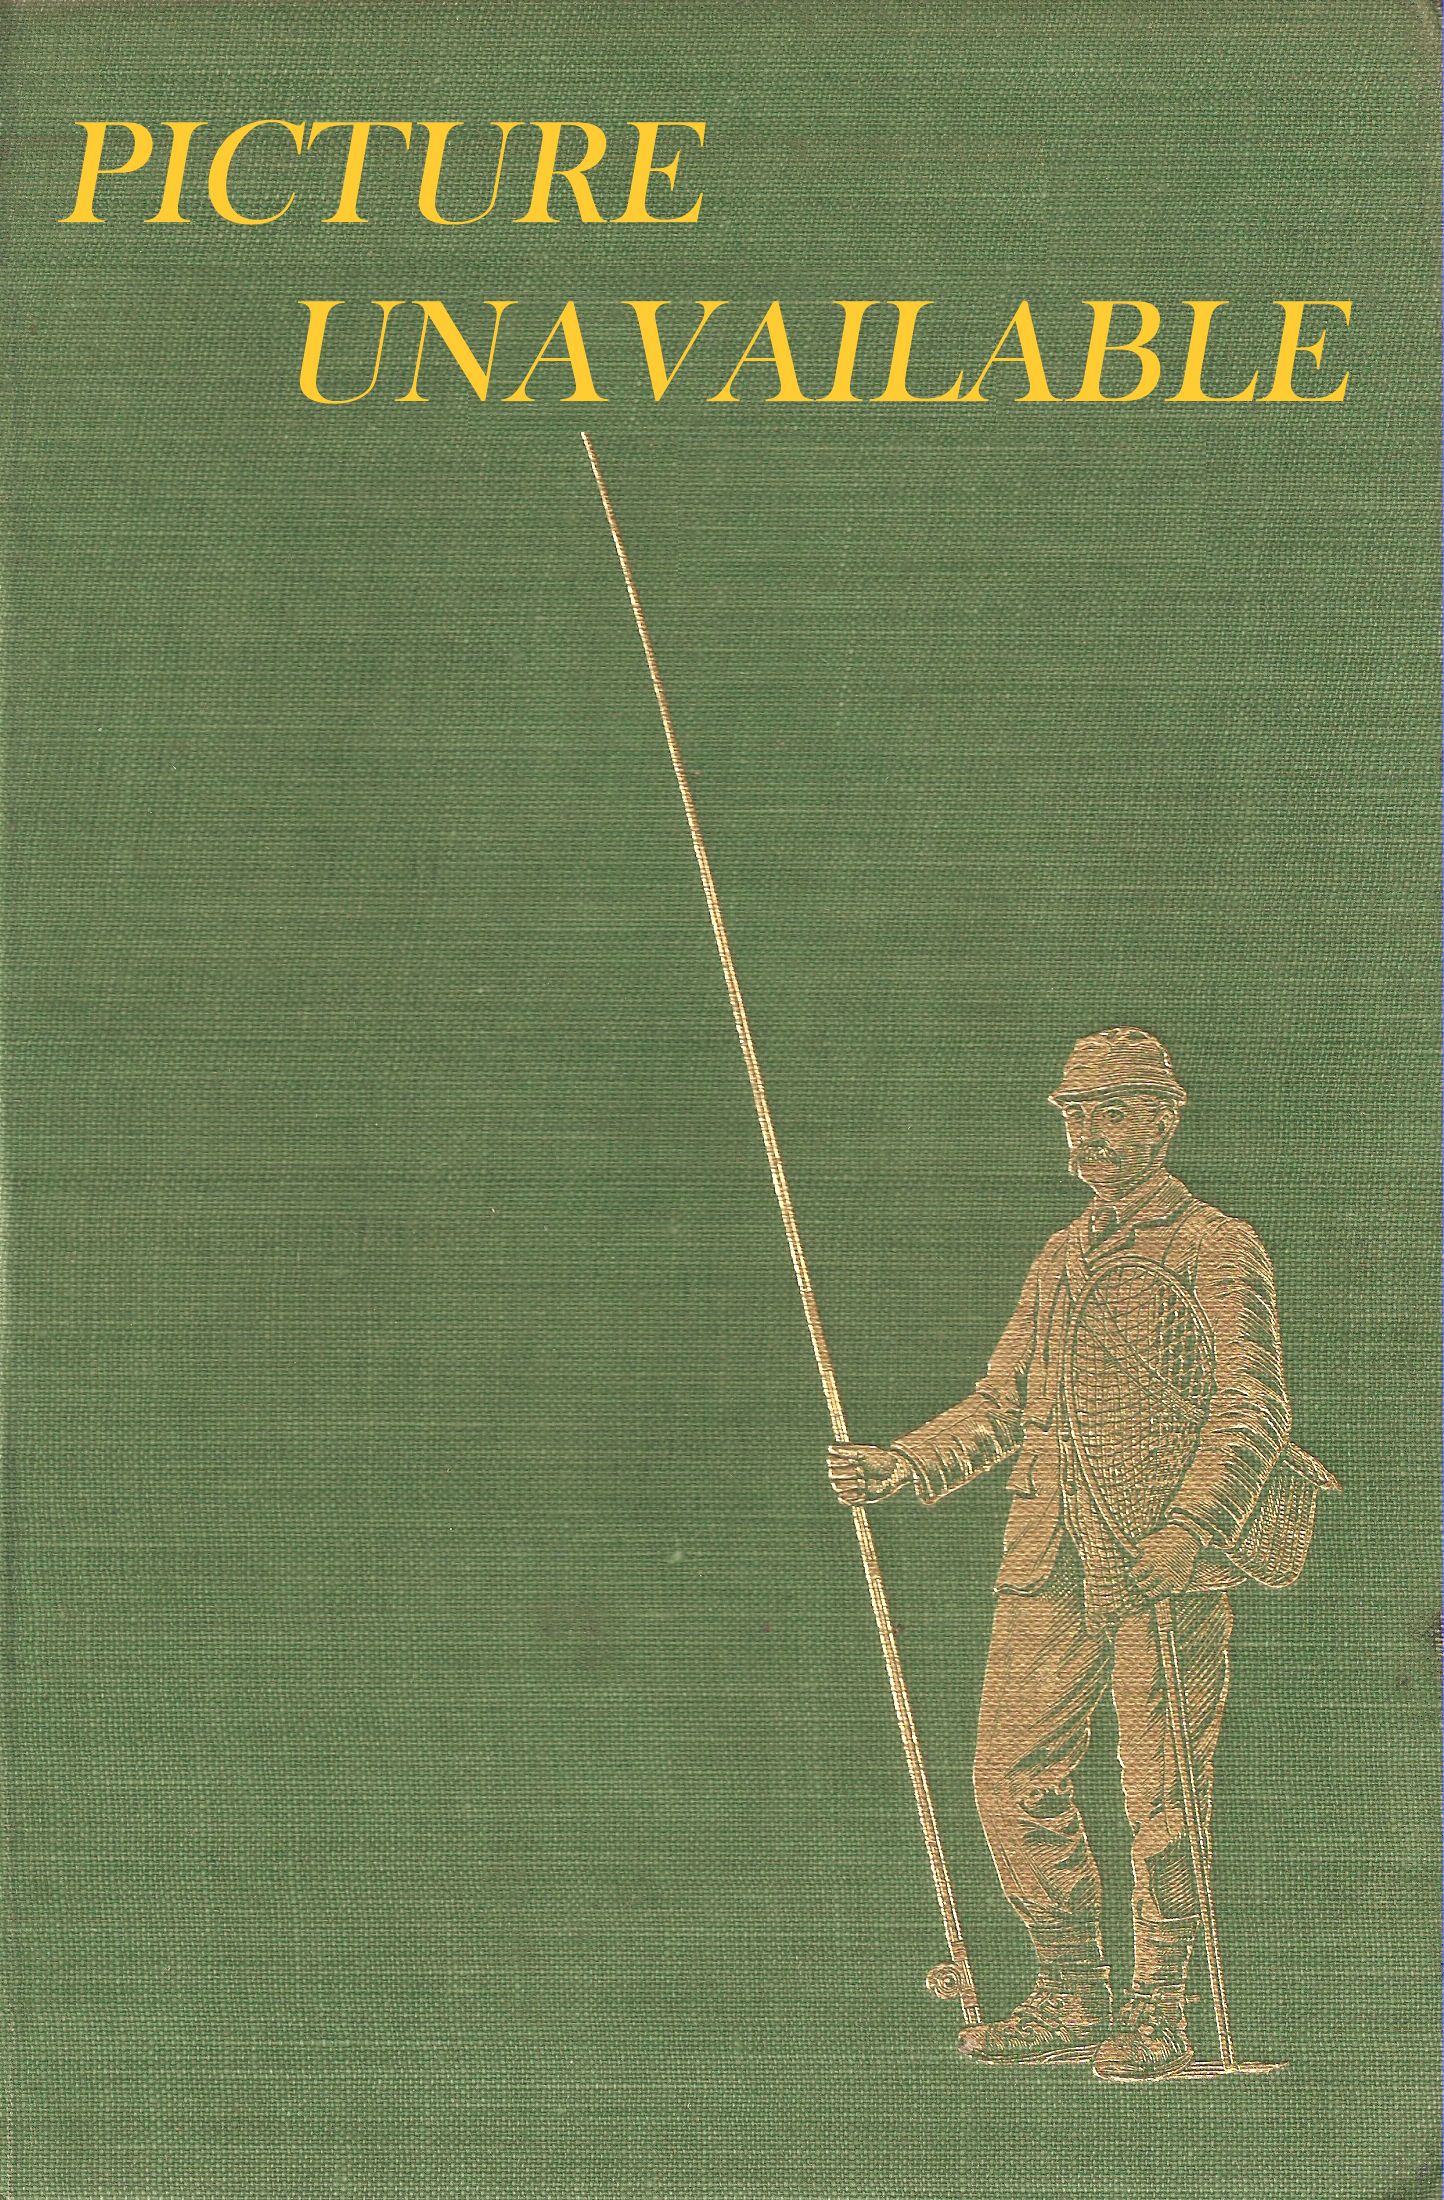 REFLECTIONS: HIGHLIGHTS FROM AN ANGLING LIFE. By Chris Turnbull. De luxe  leather-bound edition.